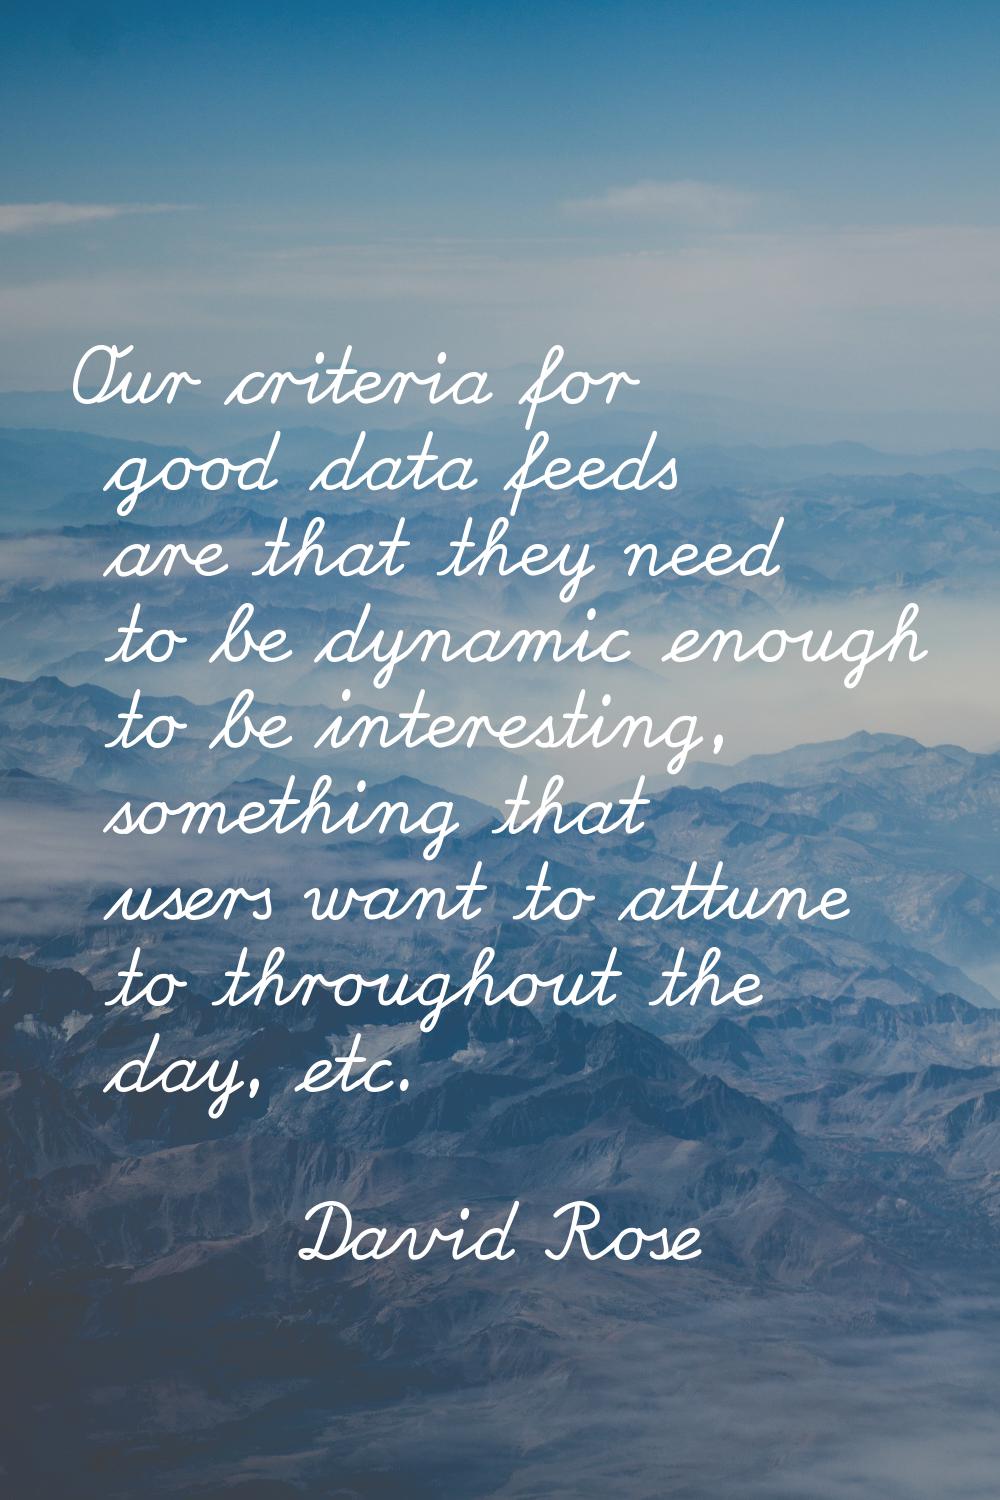 Our criteria for good data feeds are that they need to be dynamic enough to be interesting, somethi